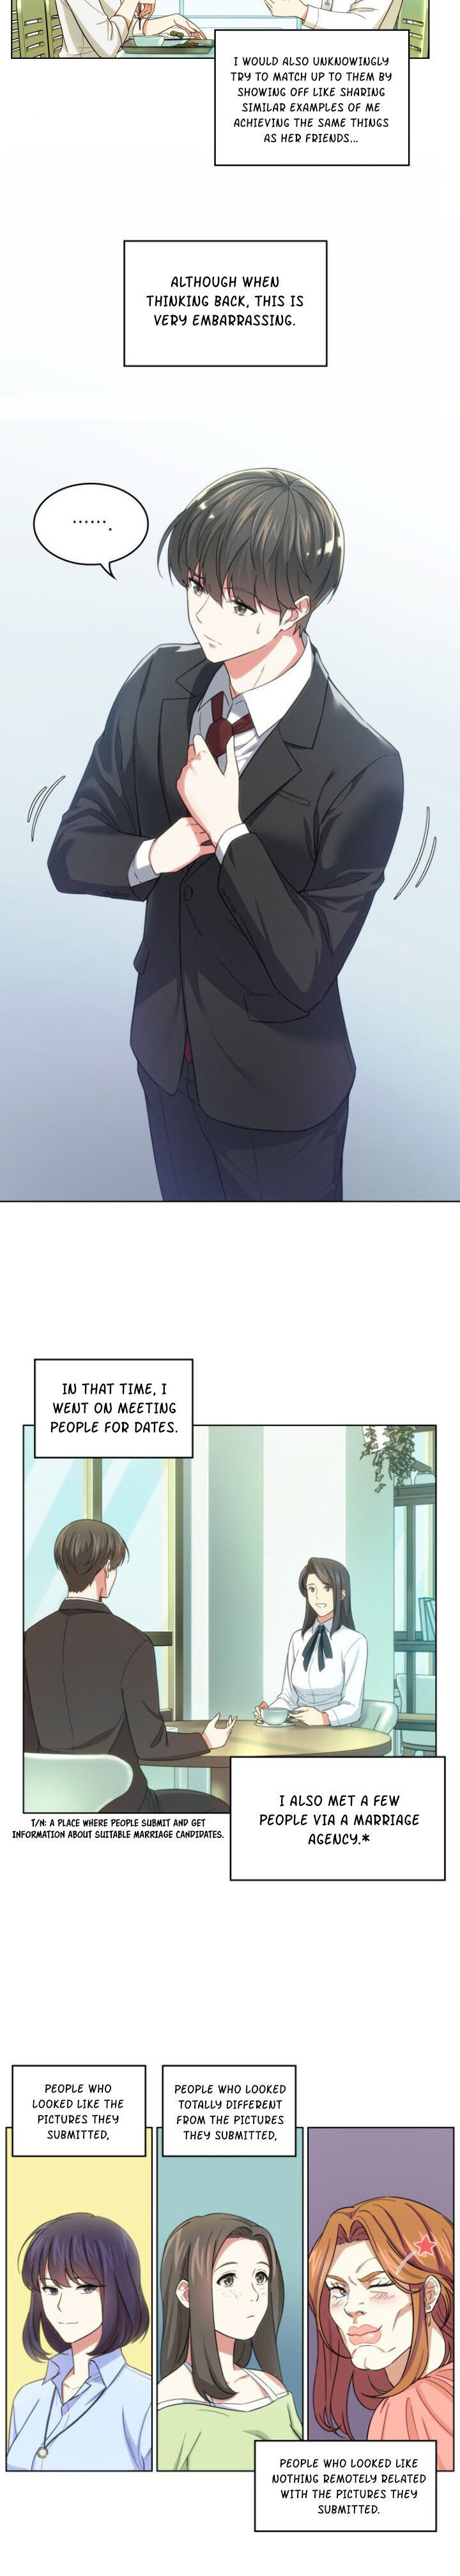 My Office Noona’s Story - Chapter 12 Page 9